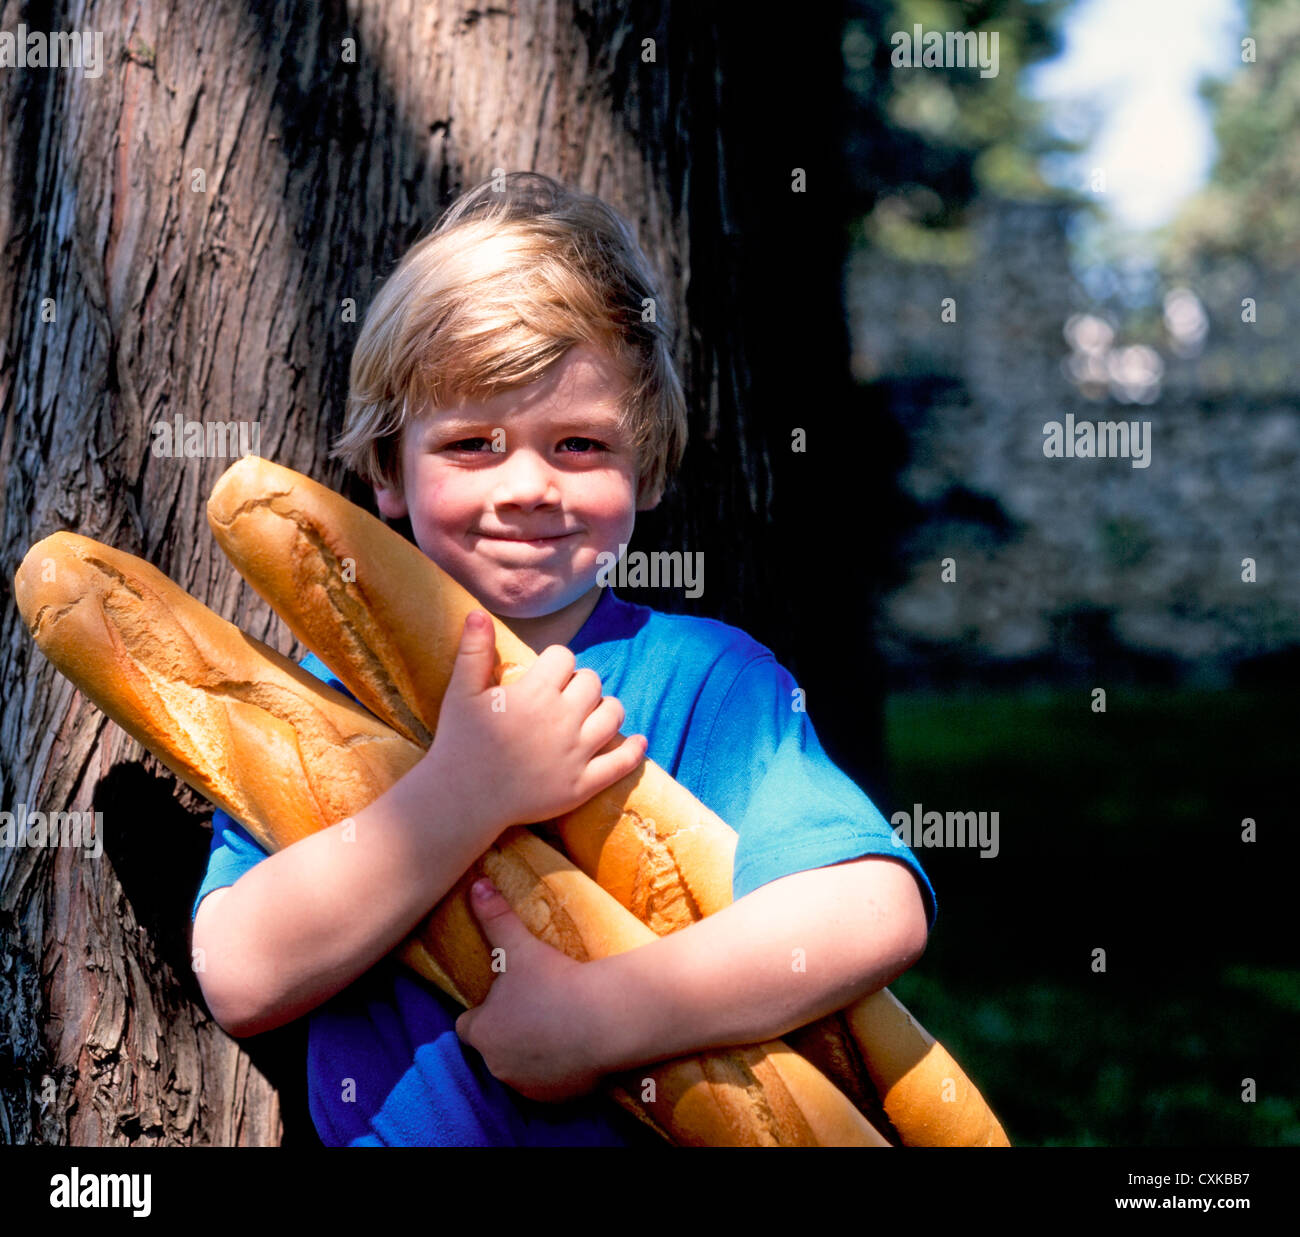 YOUNG BOY HOLDING FRENCH BREAD BAGUETTES Stock Photo